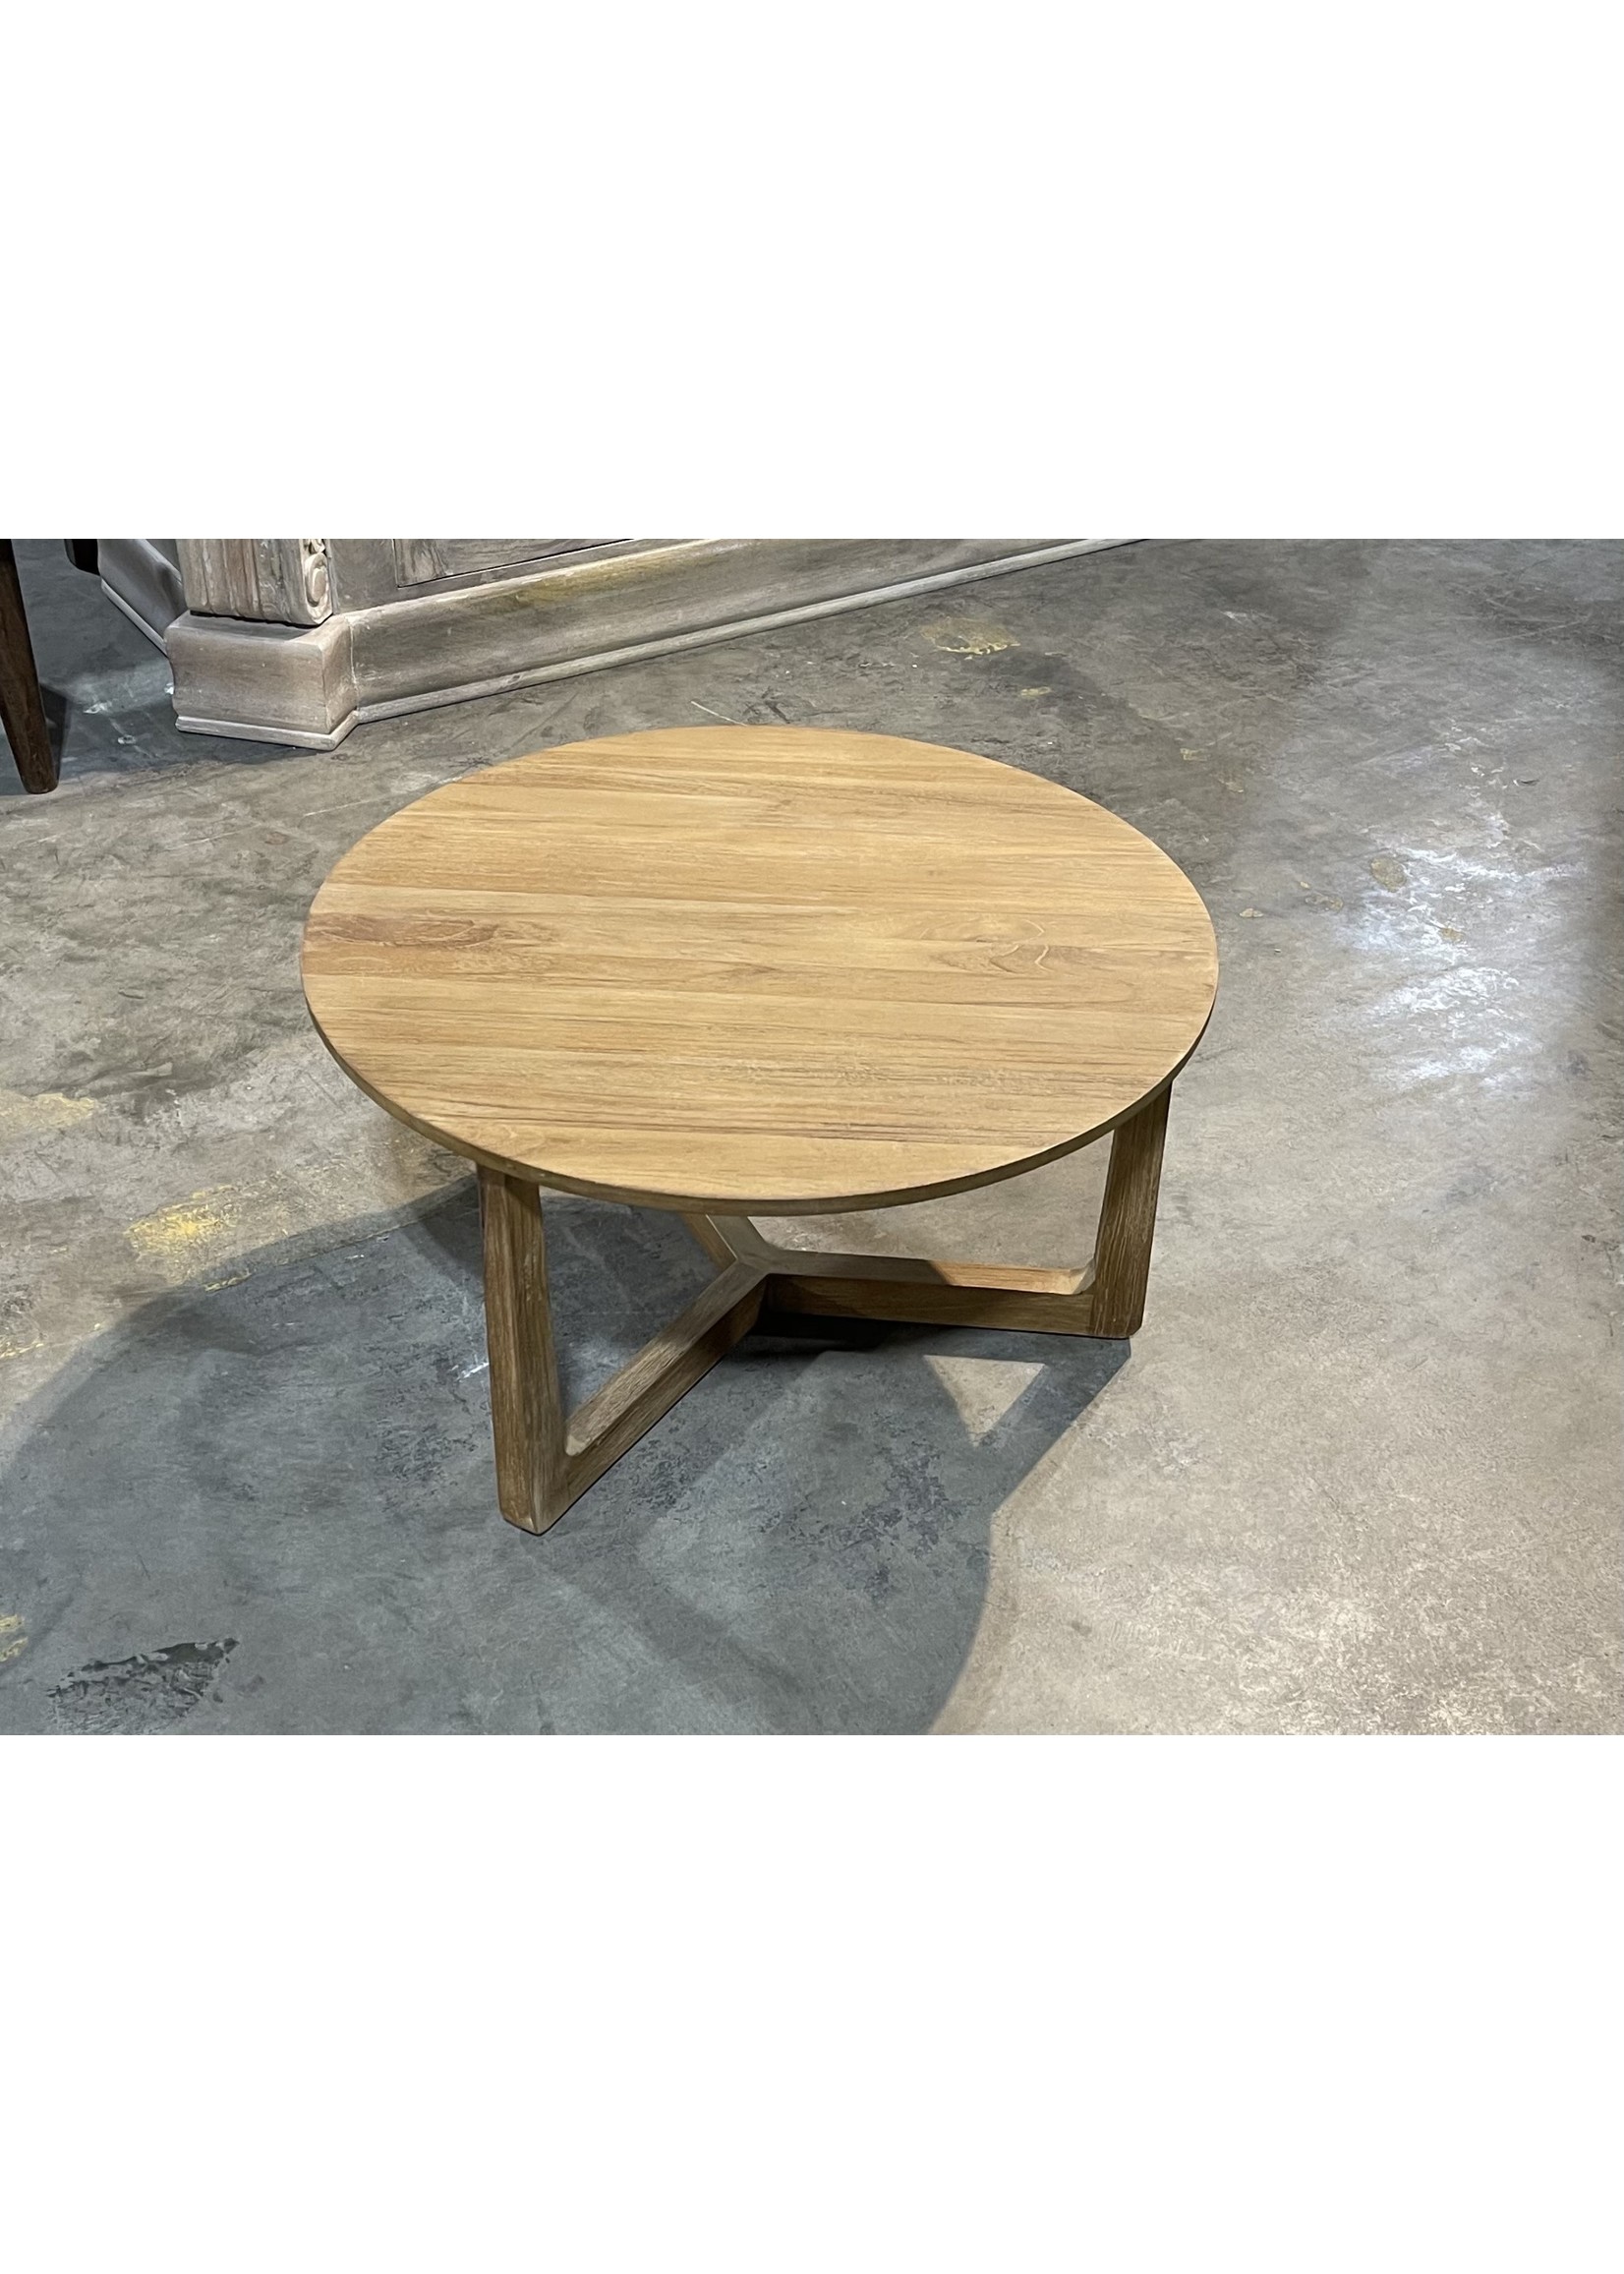 Calvin Lily Pad MED Coffee Table - 31"